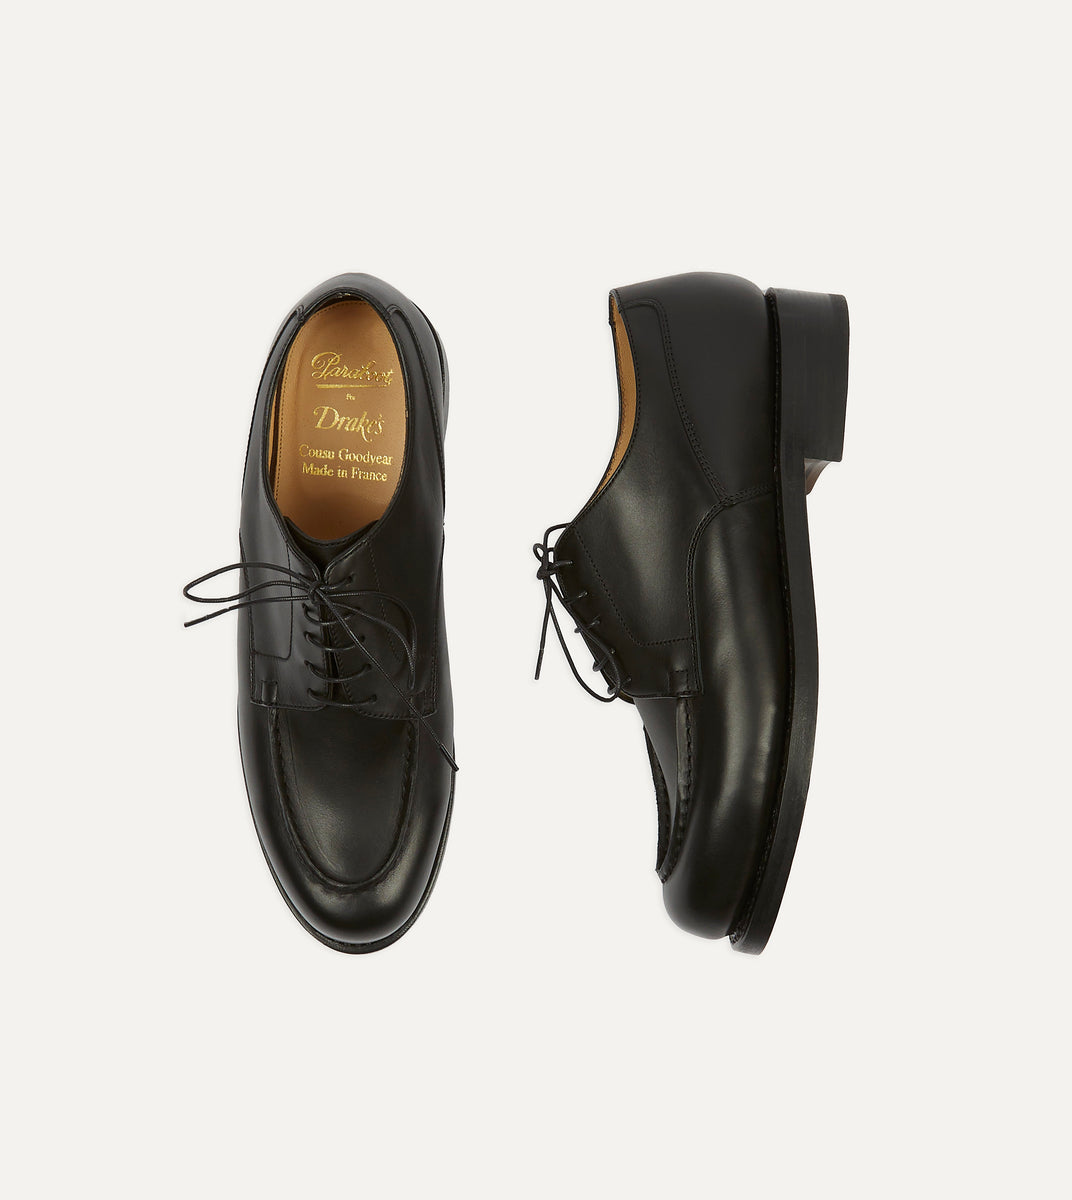 Paraboot Chambord Black Calf Leather Derby Shoe – Drakes US